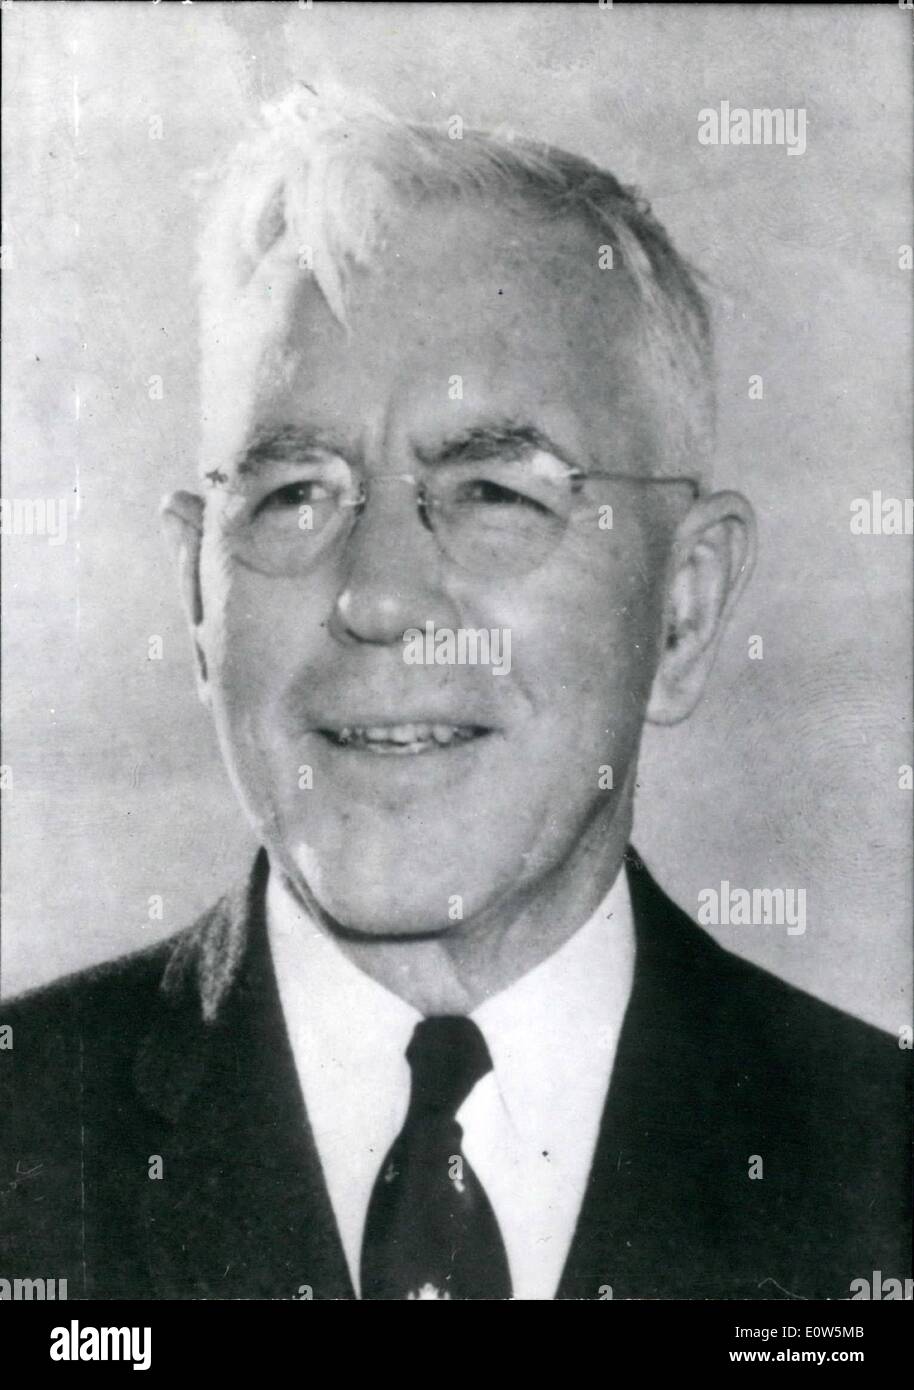 Sep. 09, 1961 - John McCone to replace Allen Dulles: President Kennedy has announced the appointment of John McCone. Former Chairman of the atomic energy commission as the head of C.I.A. succeeding Allen Dulles. Photo shows a recent portrait of John McCone. Stock Photo